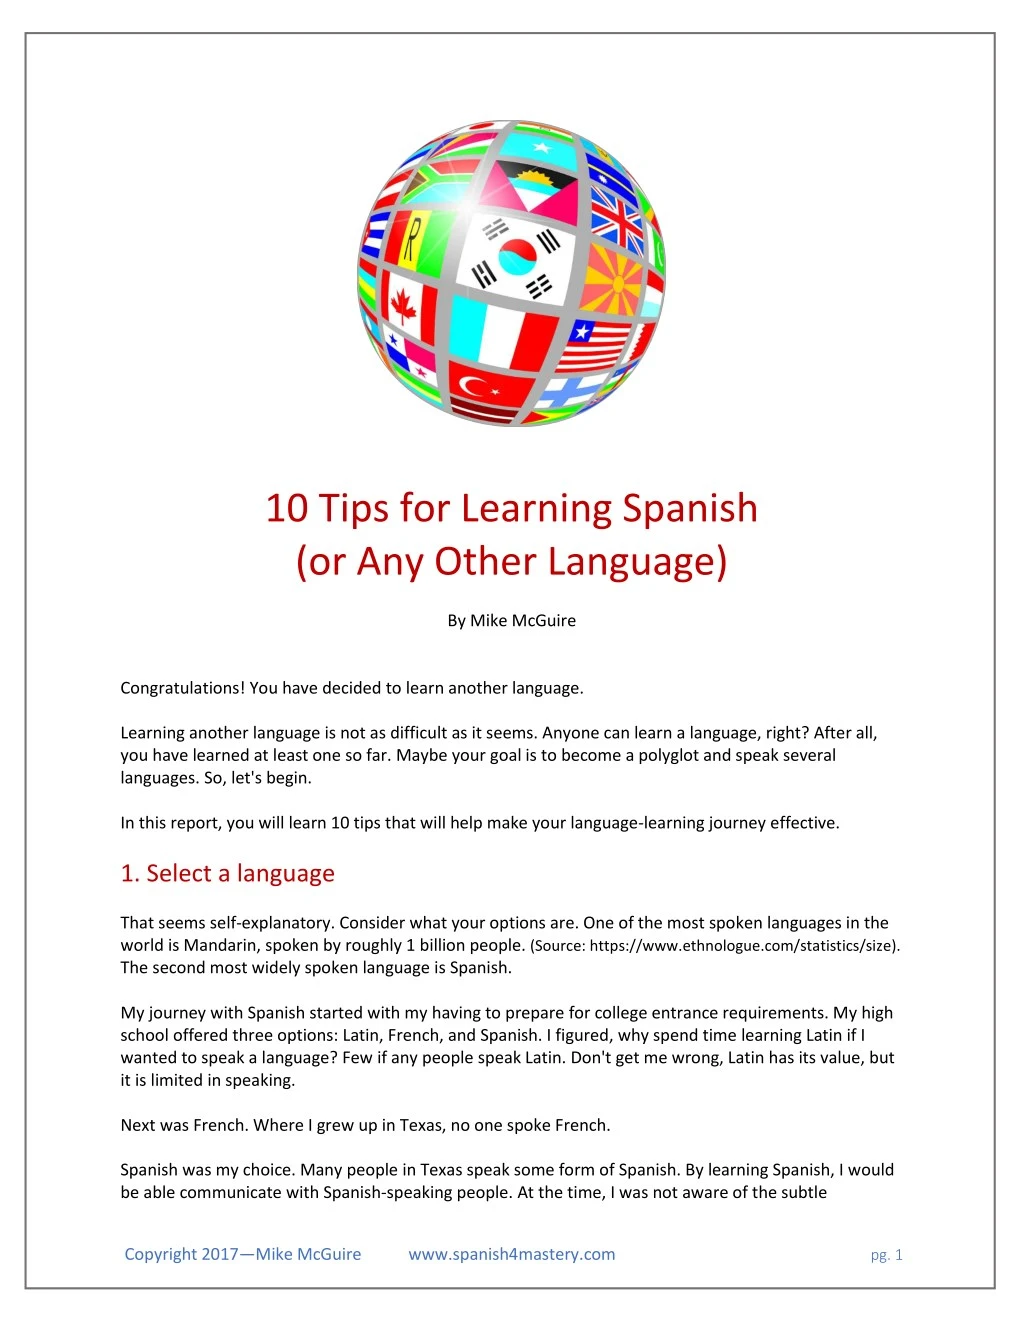 10 tips for learning spanish or any other